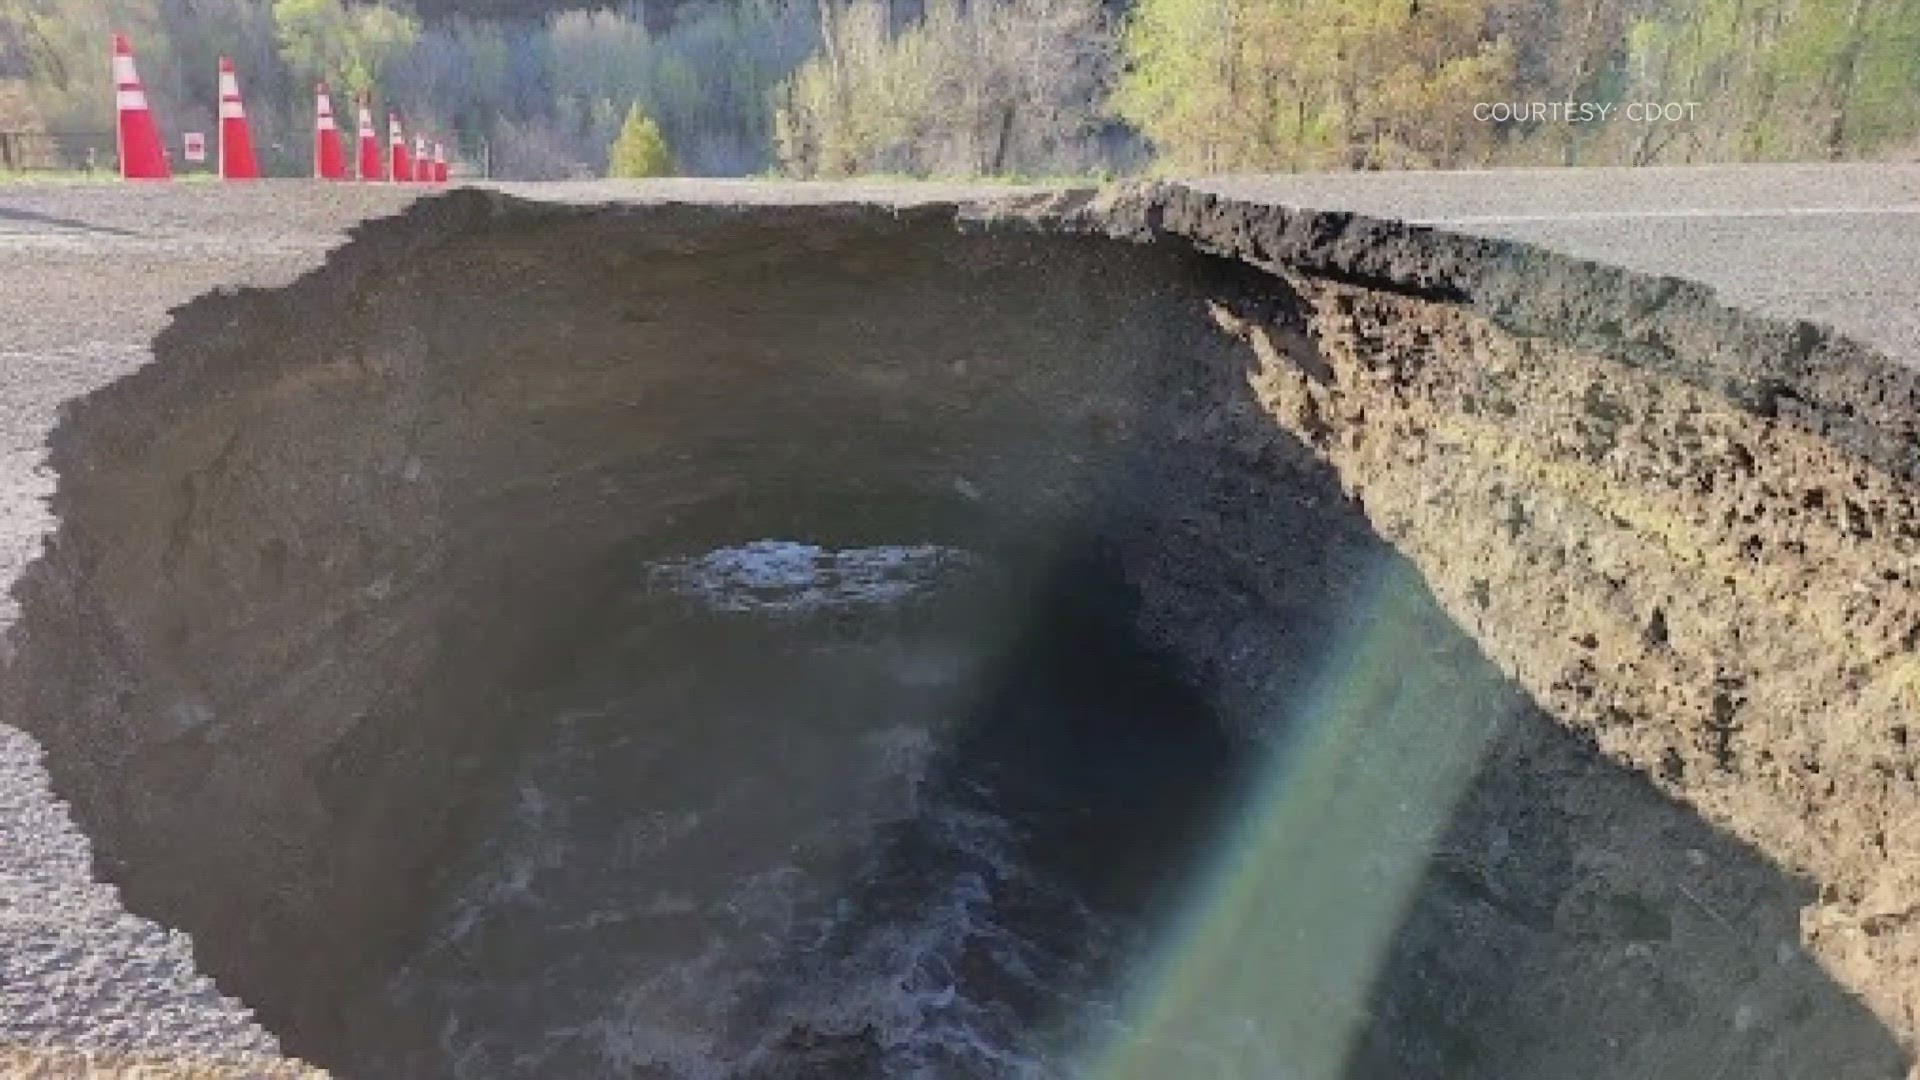 CDOT said spring runoff contributed to the sinkhole.